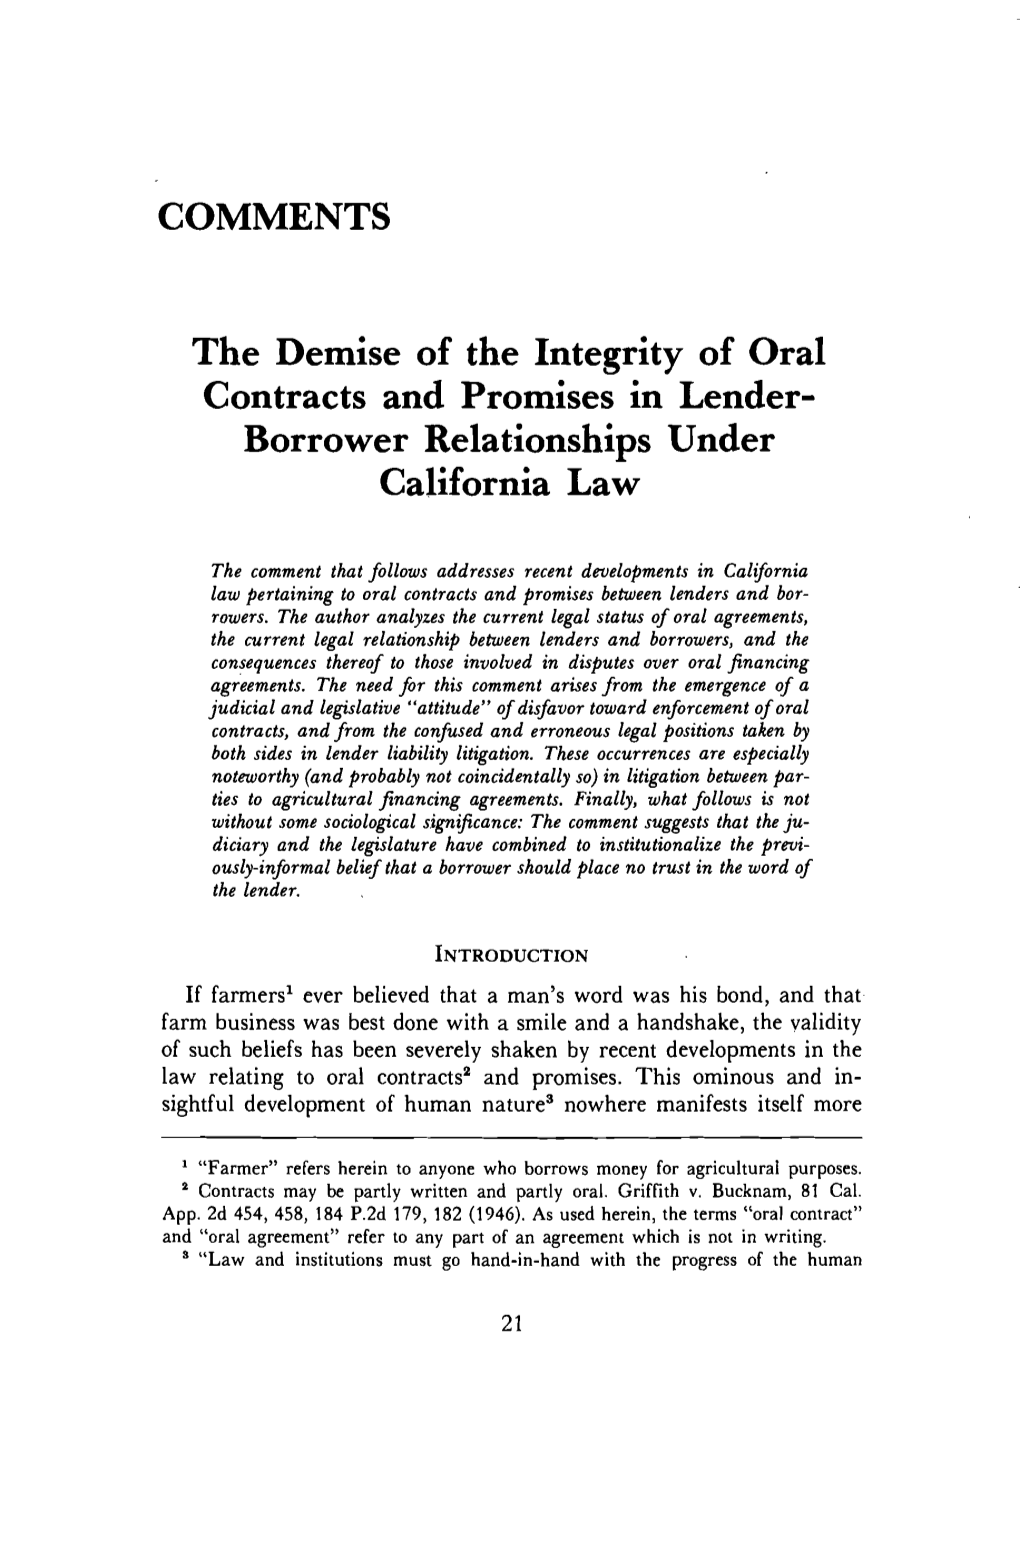 COMMENTS the Demise of the Integrity of Oral Contracts And